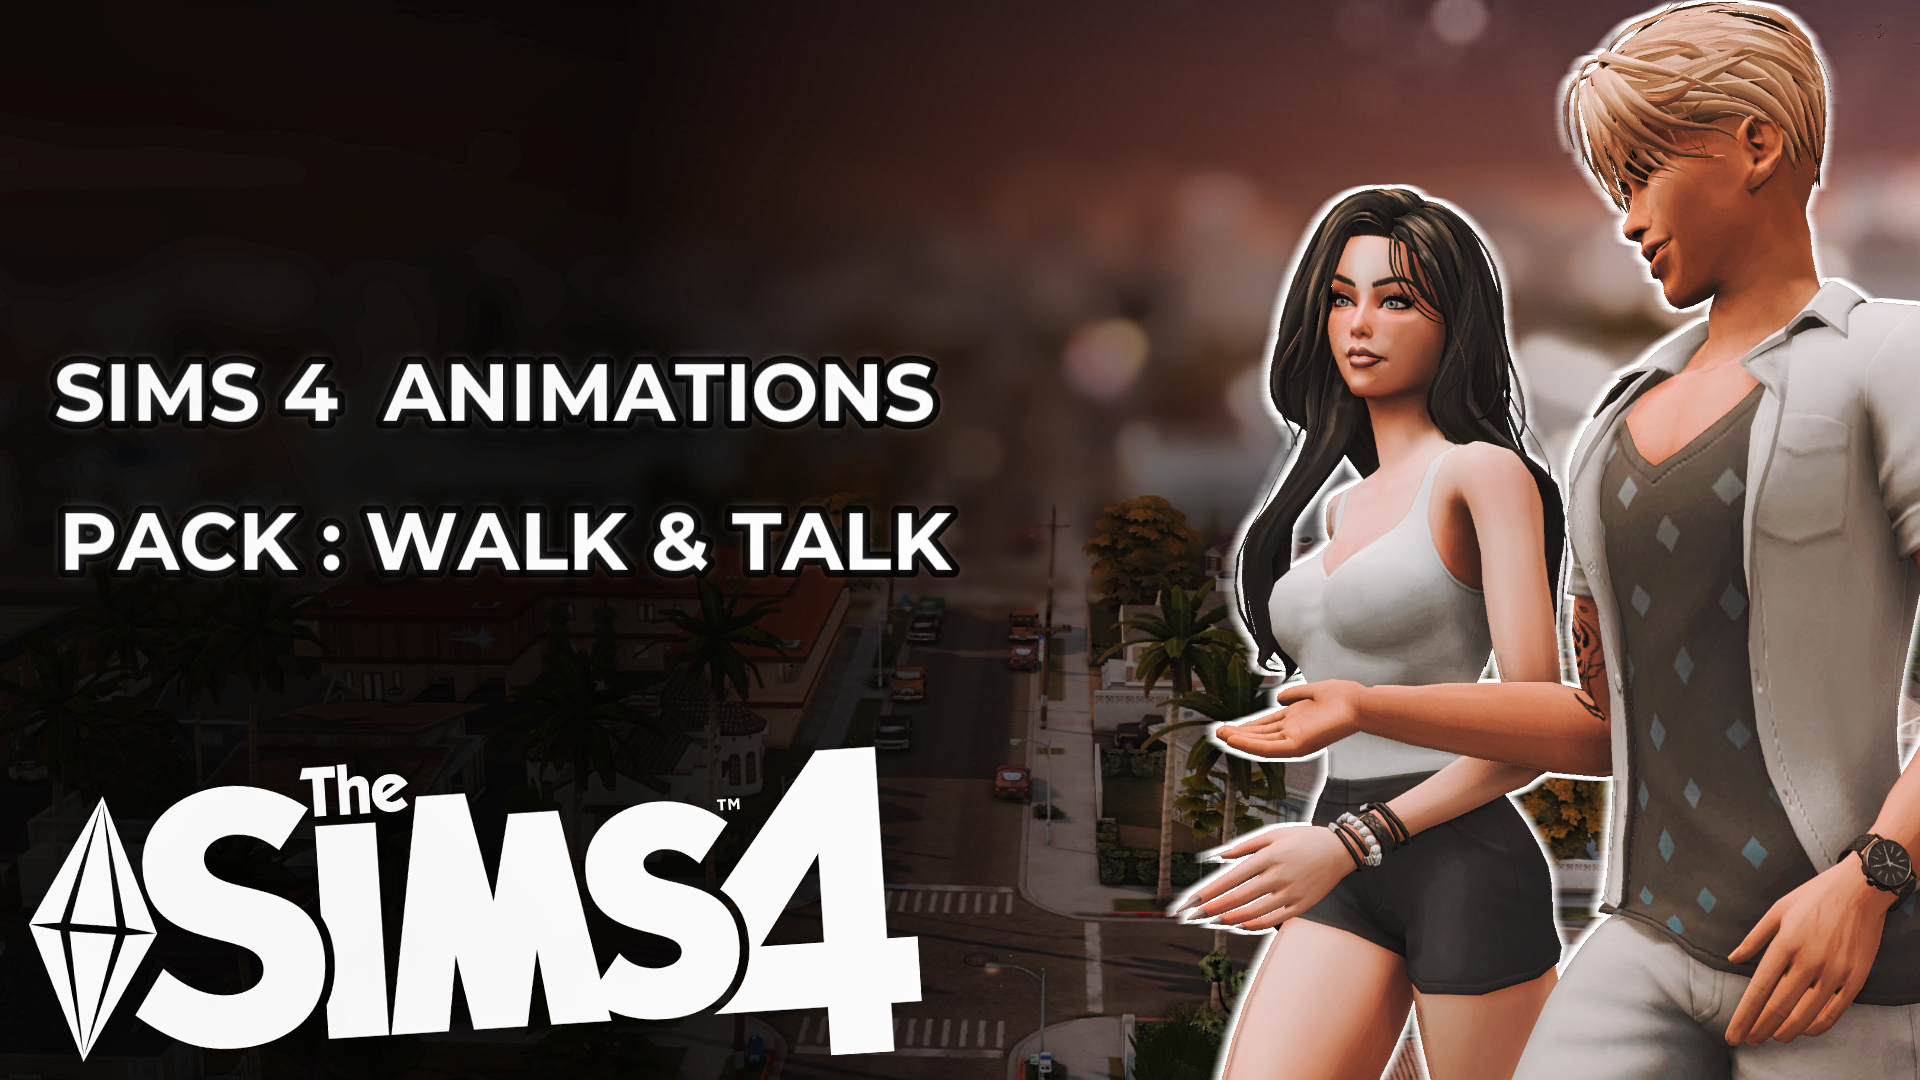 Poses paired walk by Mari L | Walking poses, Poses, Sims 4 stories